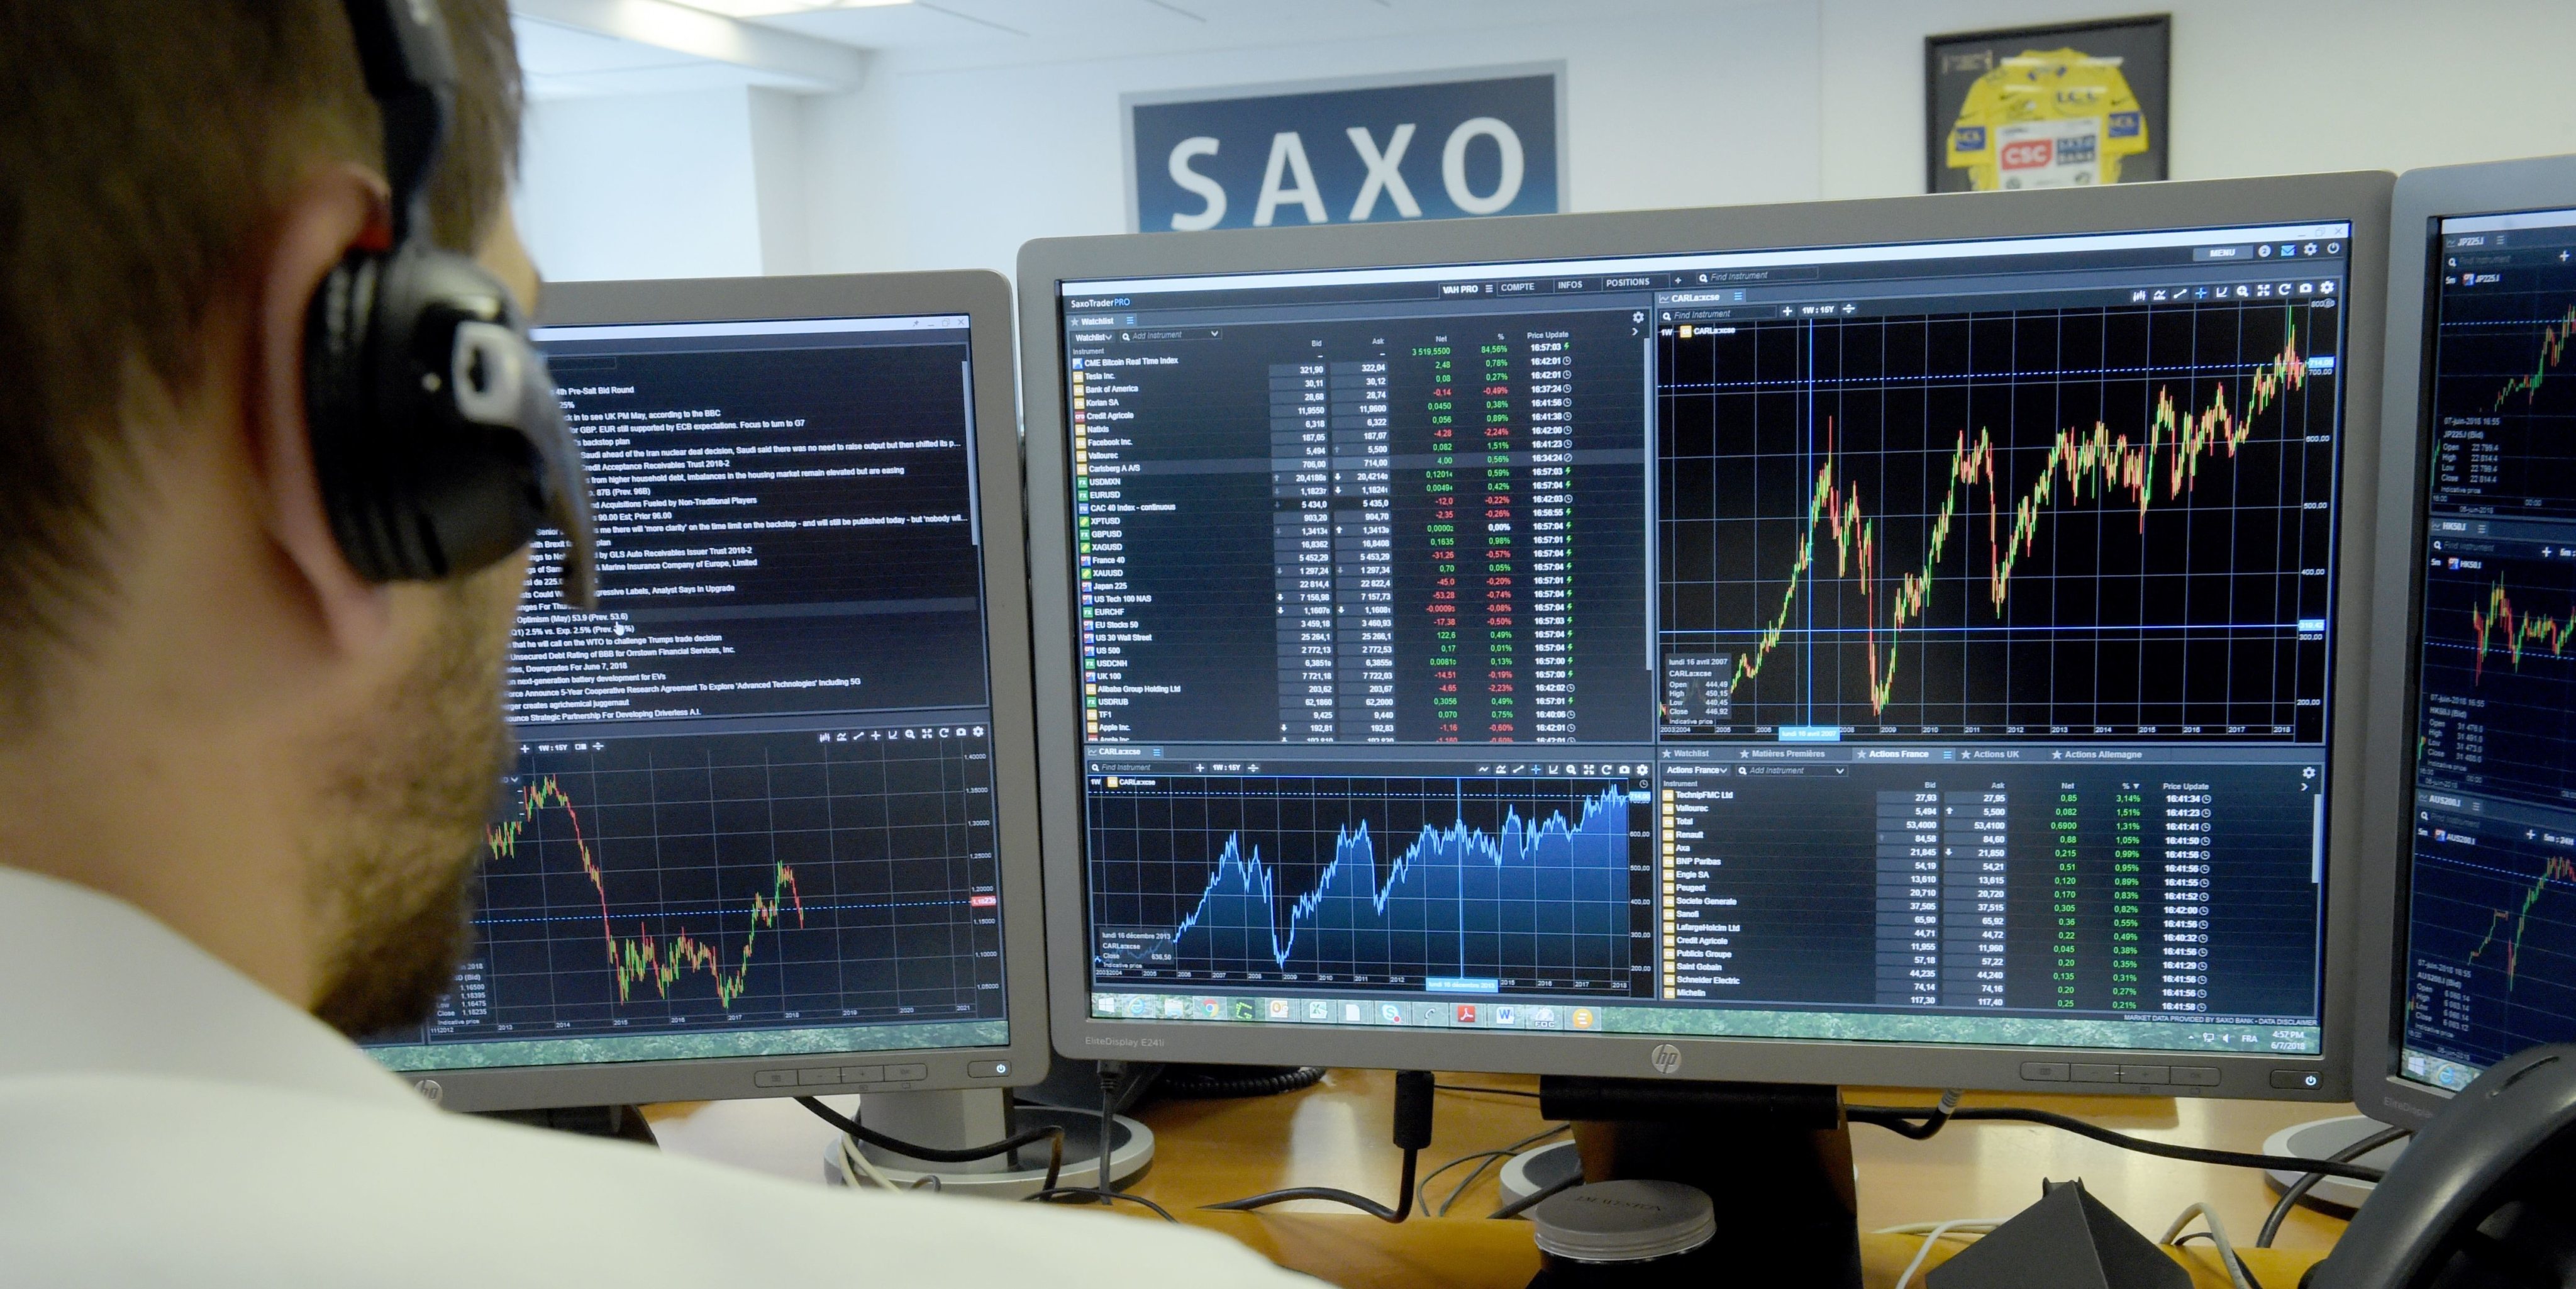 FRANCE-INVESTMENT-TRADING-SAXO-BANK